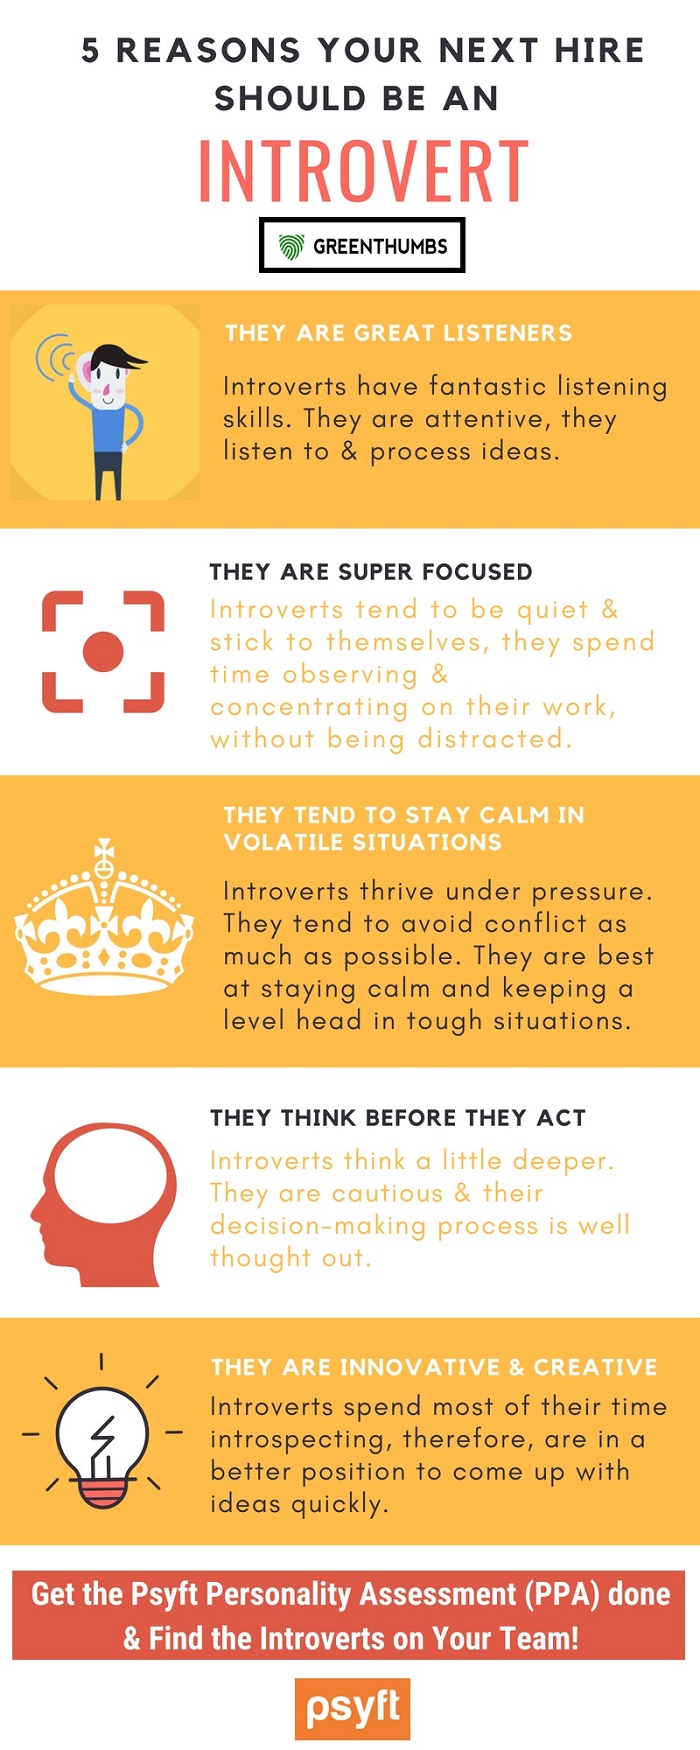 5 Reasons To Hire An Introvert [Infographic]